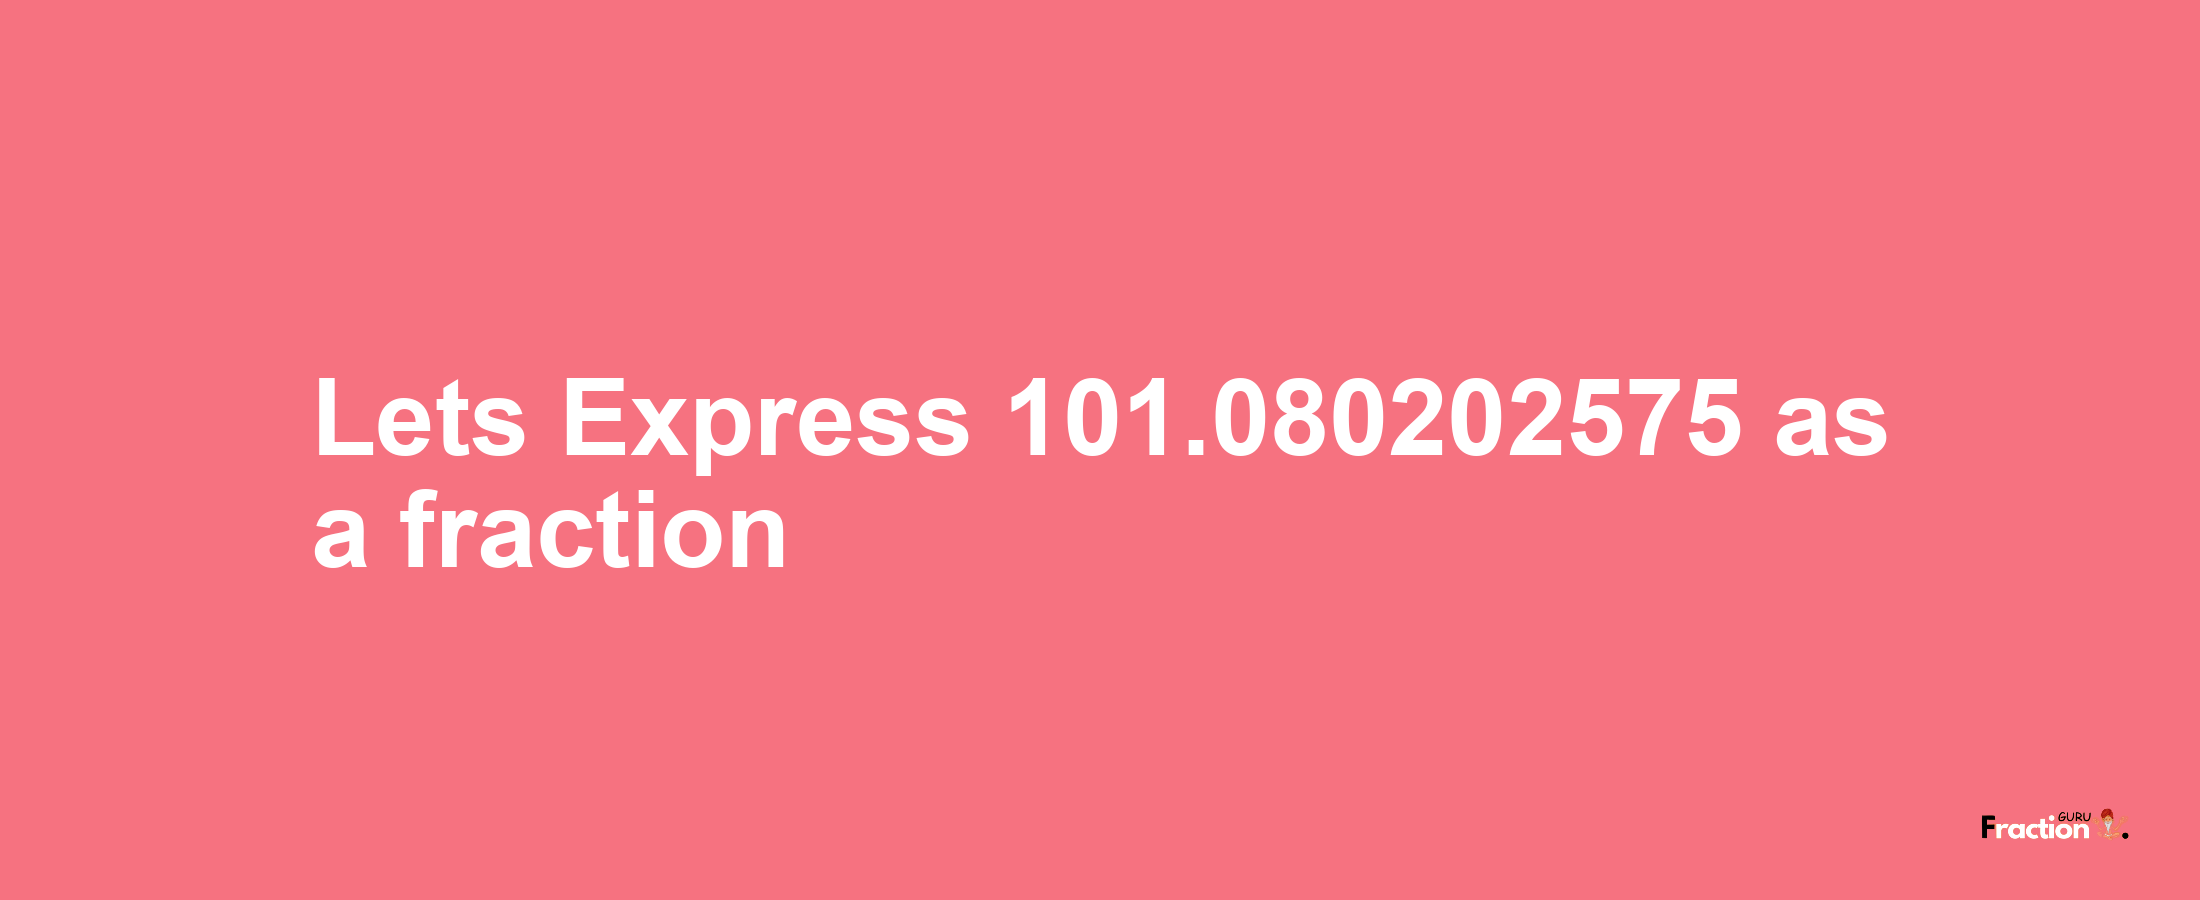 Lets Express 101.080202575 as afraction